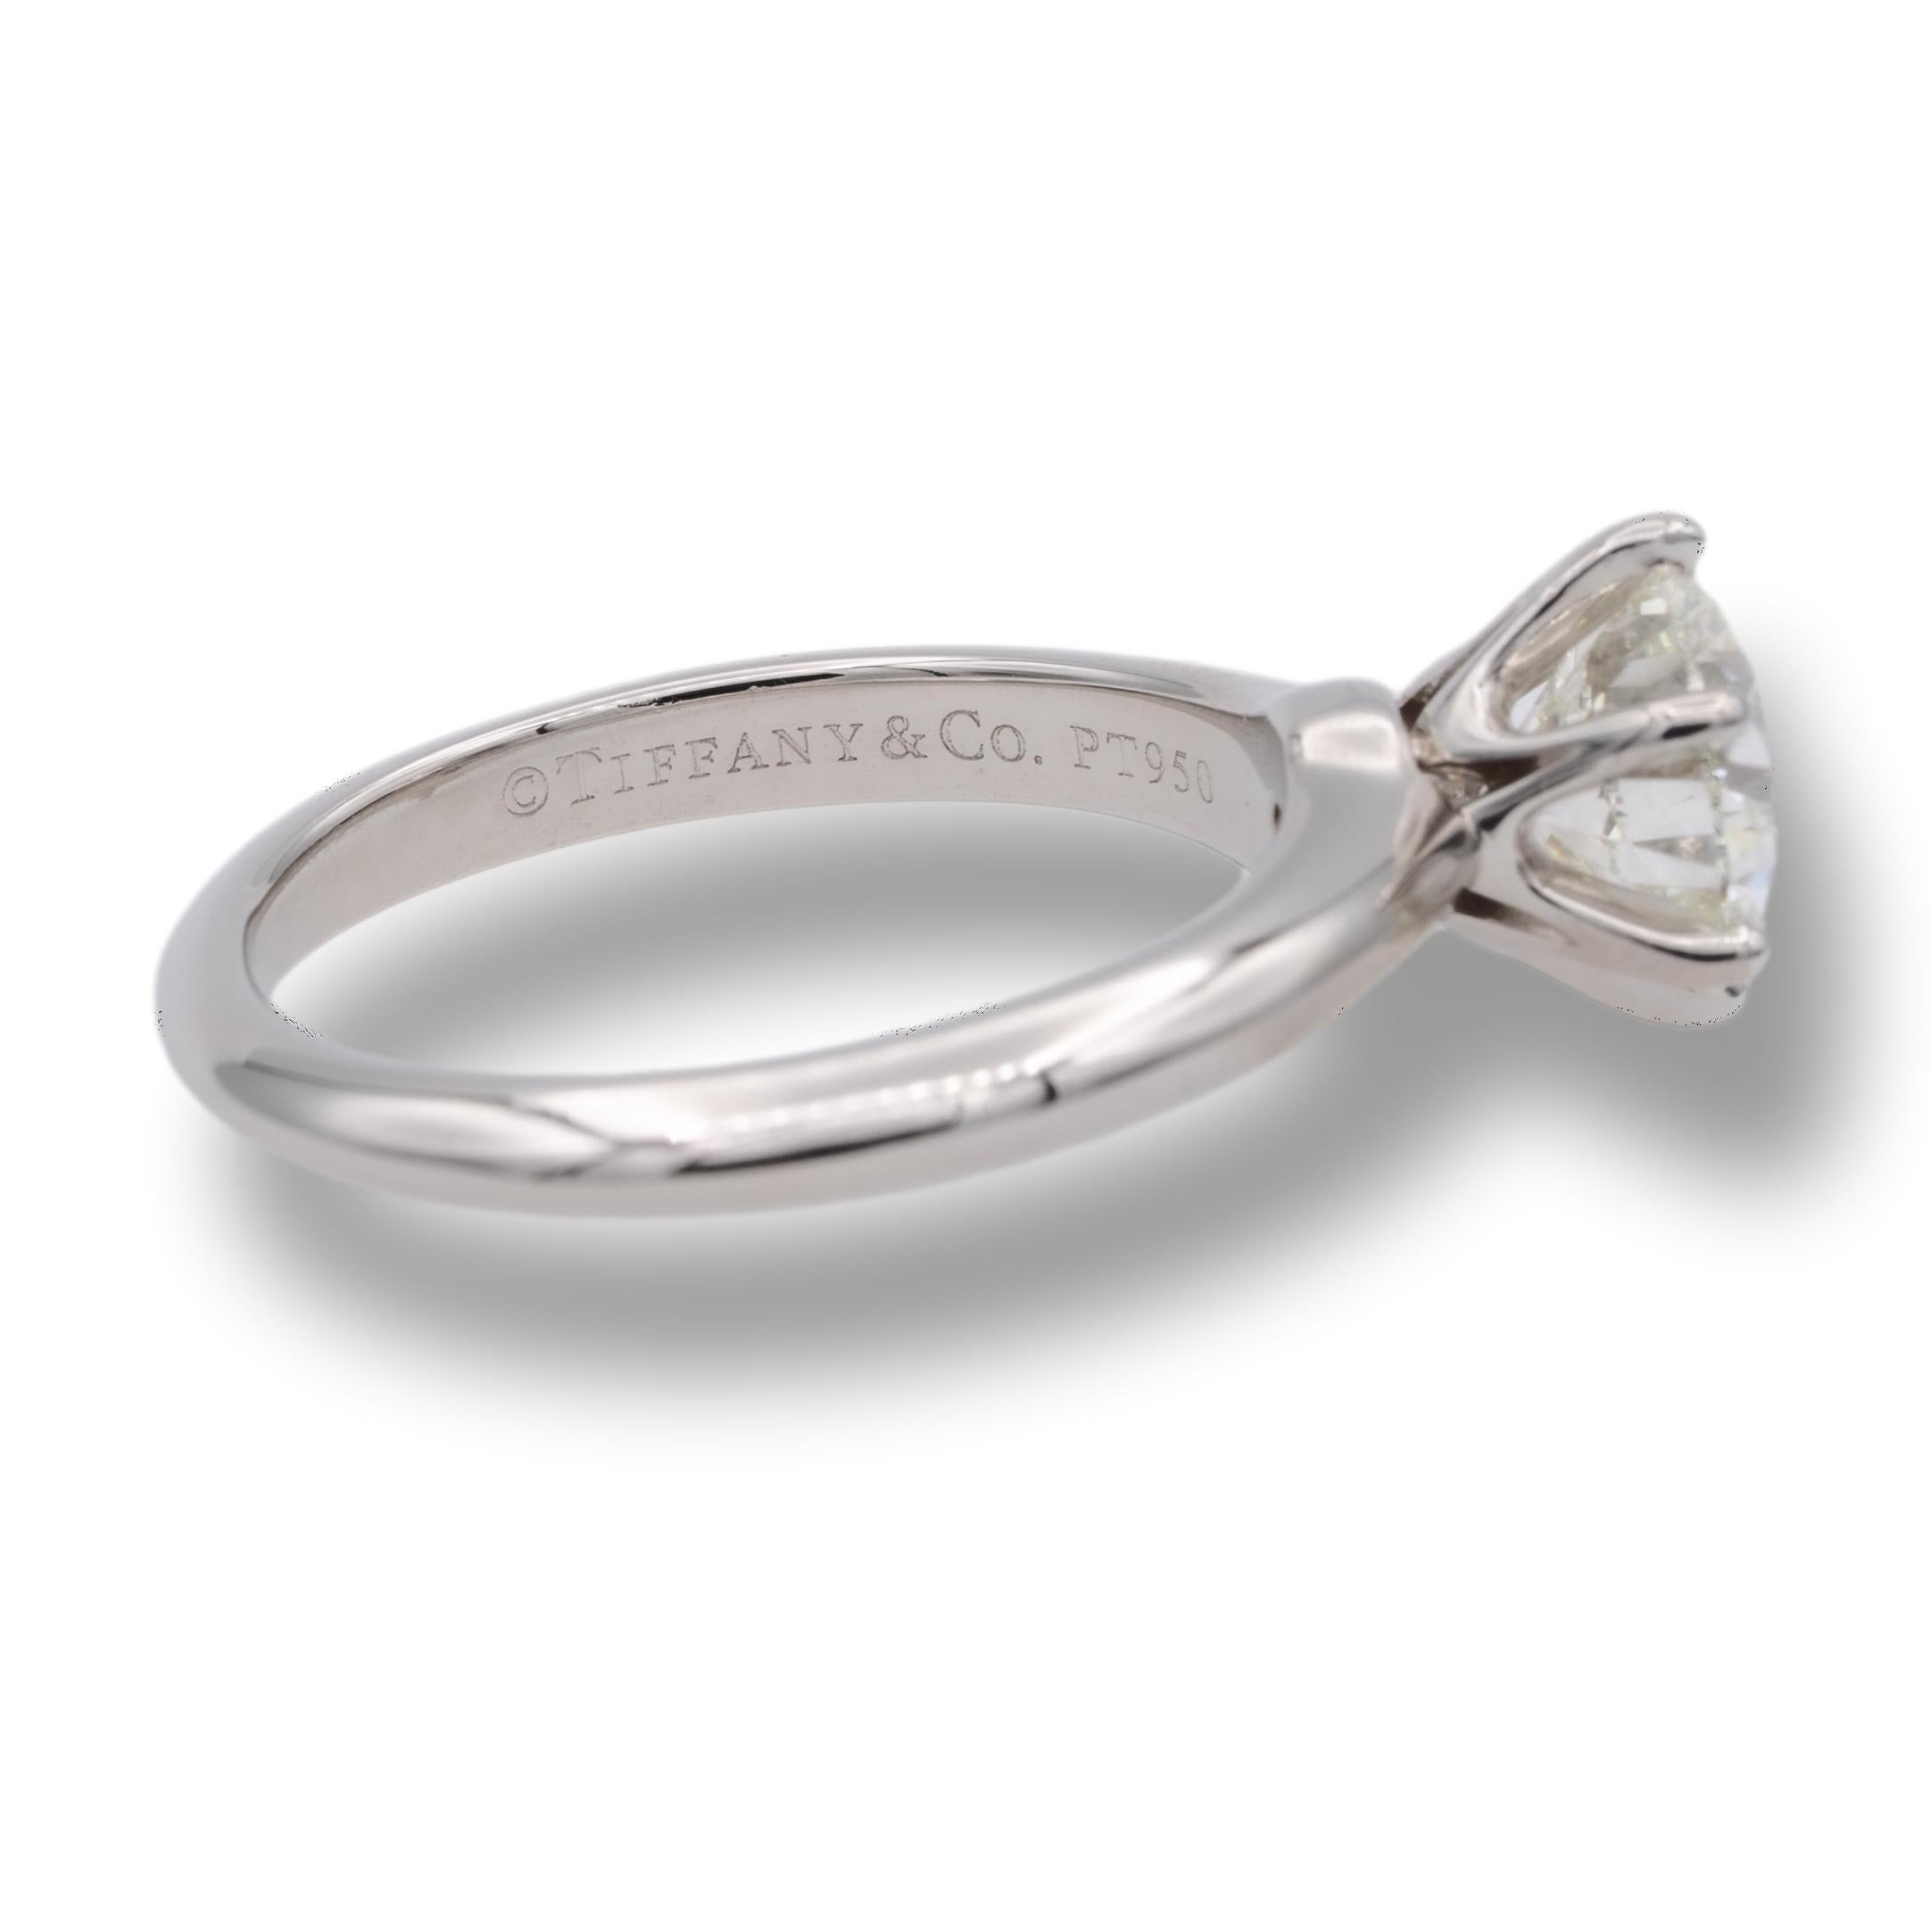 Tiffany & Co. Engagement ring finely crafted in platinum with a 1.26 ct I color VS1 clarity. This ring has been inspected and appraised by IGI Laboratory( International Gemological Institute) as an authentic Tiffany ring with all the ring